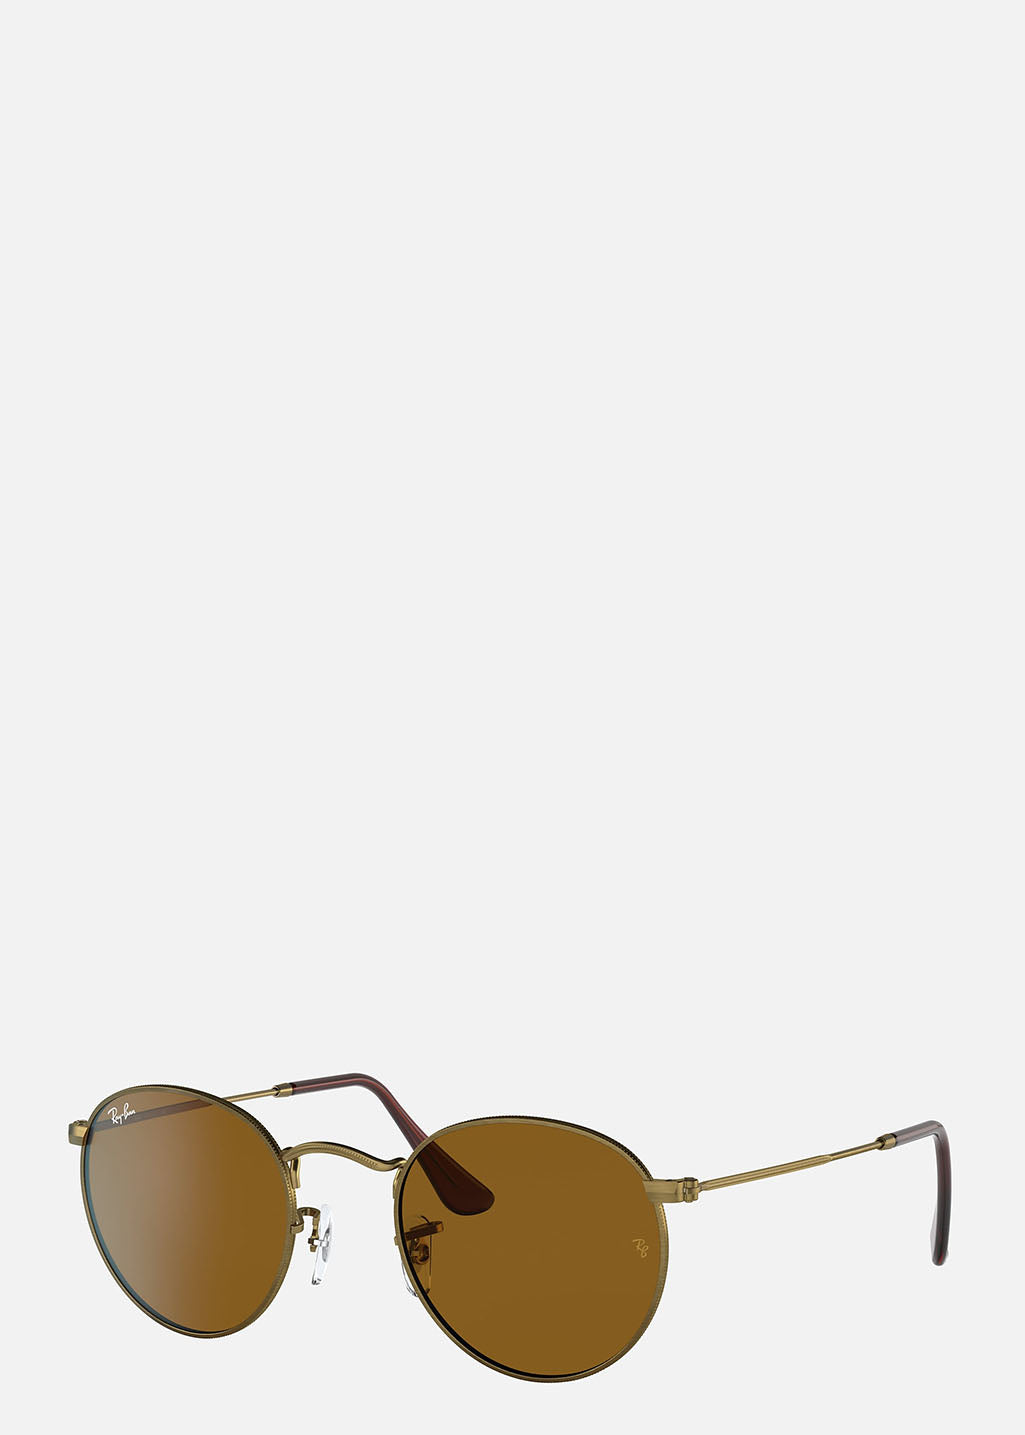 Ray Ban - RB3447 - 9228/33 - Round Metal Antique Gold/Brown